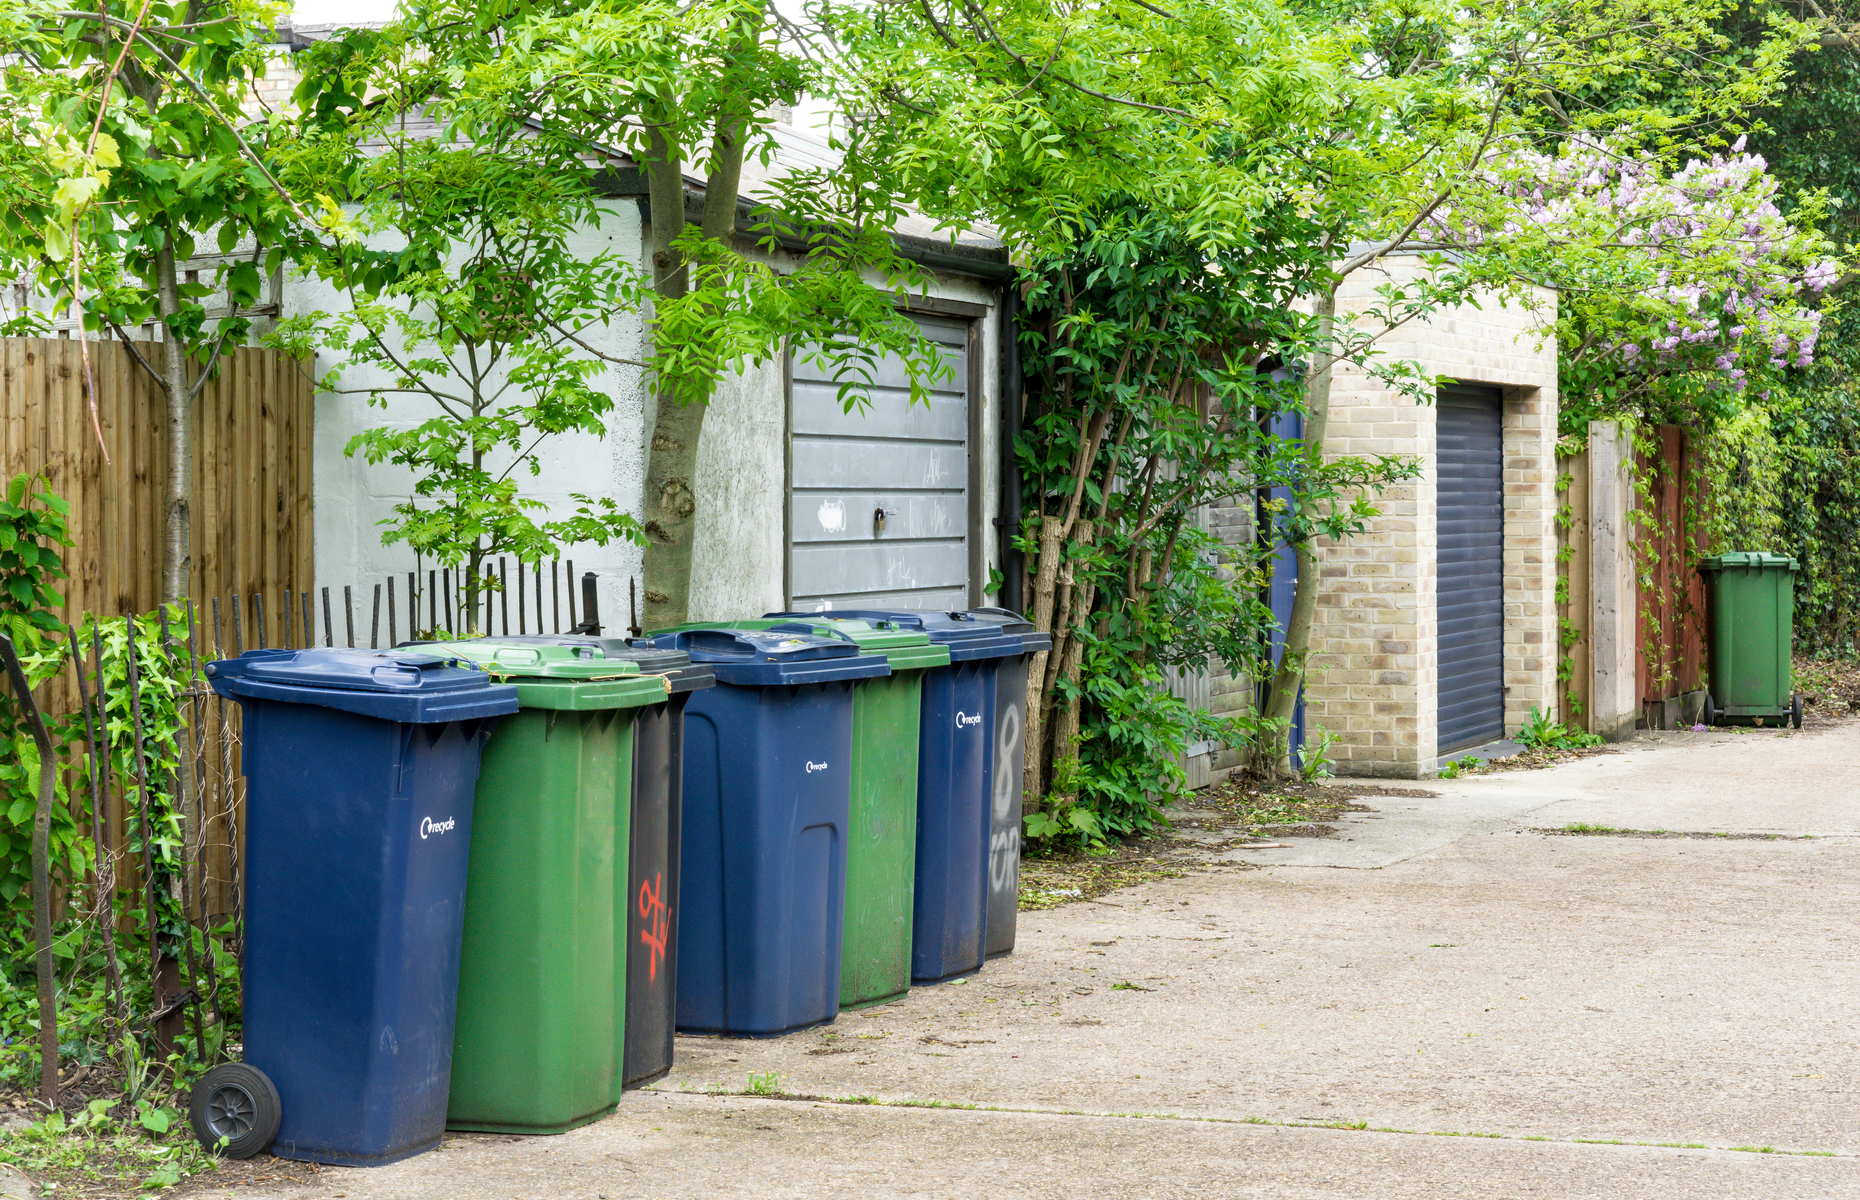 Many waste and recycling collections across the country are running limited services. Image: Imran Khan Photography / Shutterstock